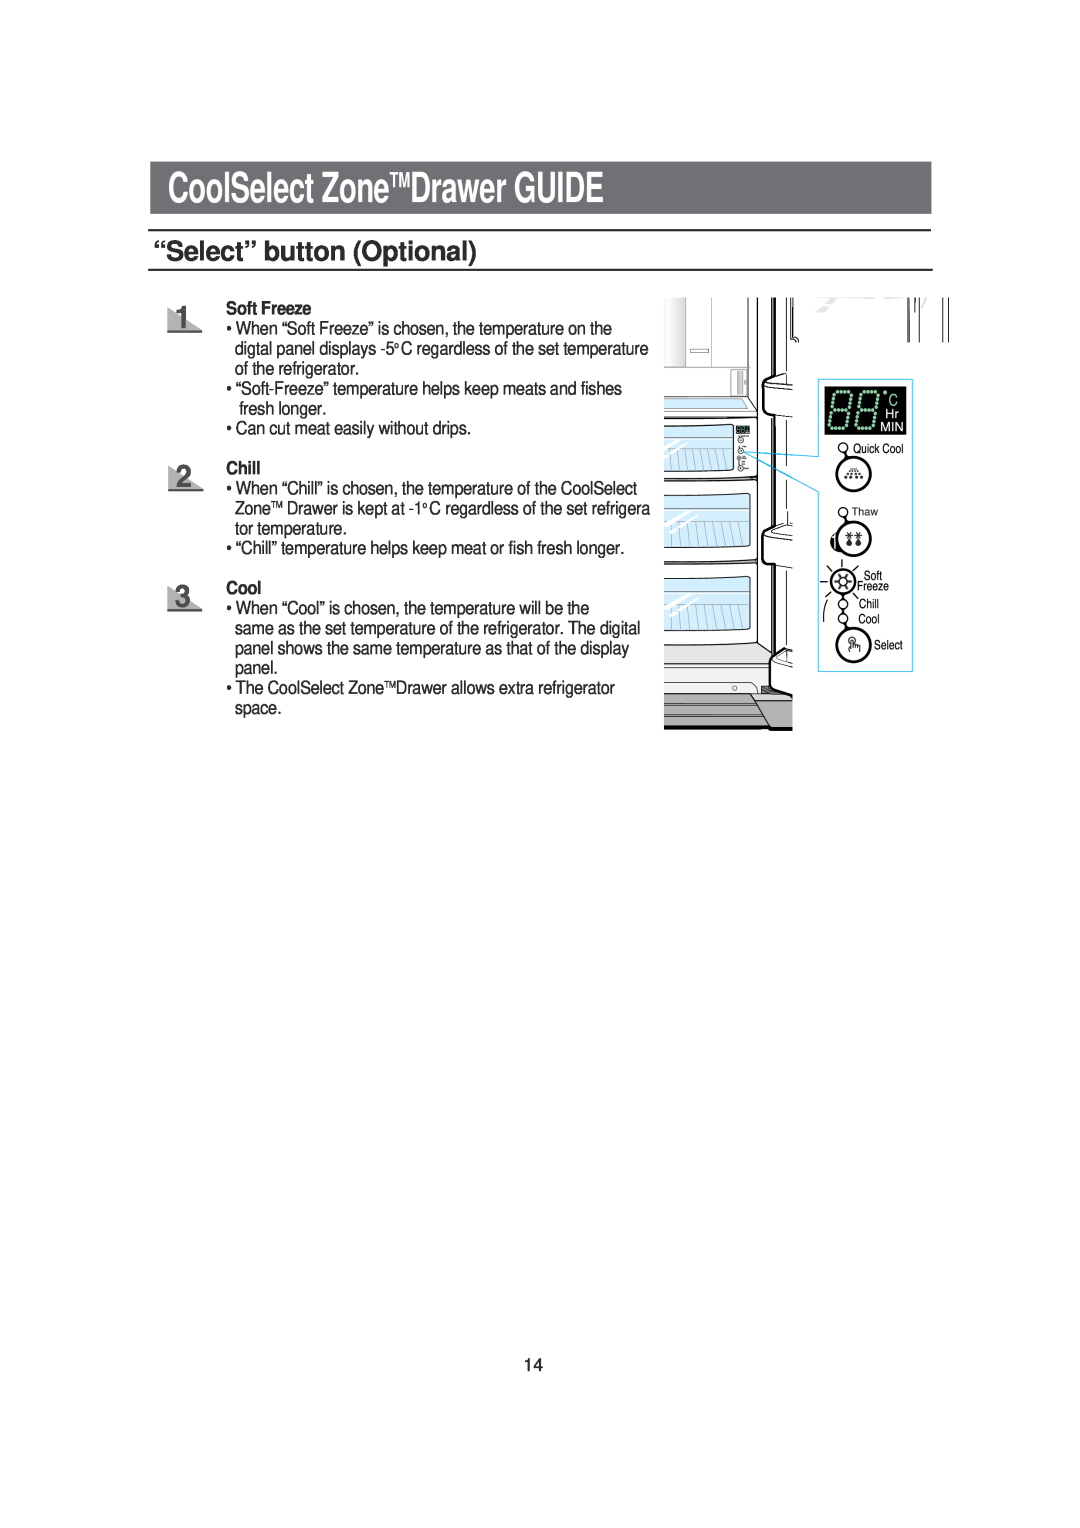 Samsung SRS620DW owner manual CoolSelect ZoneTMDrawer GUIDE, “Select” button Optional 